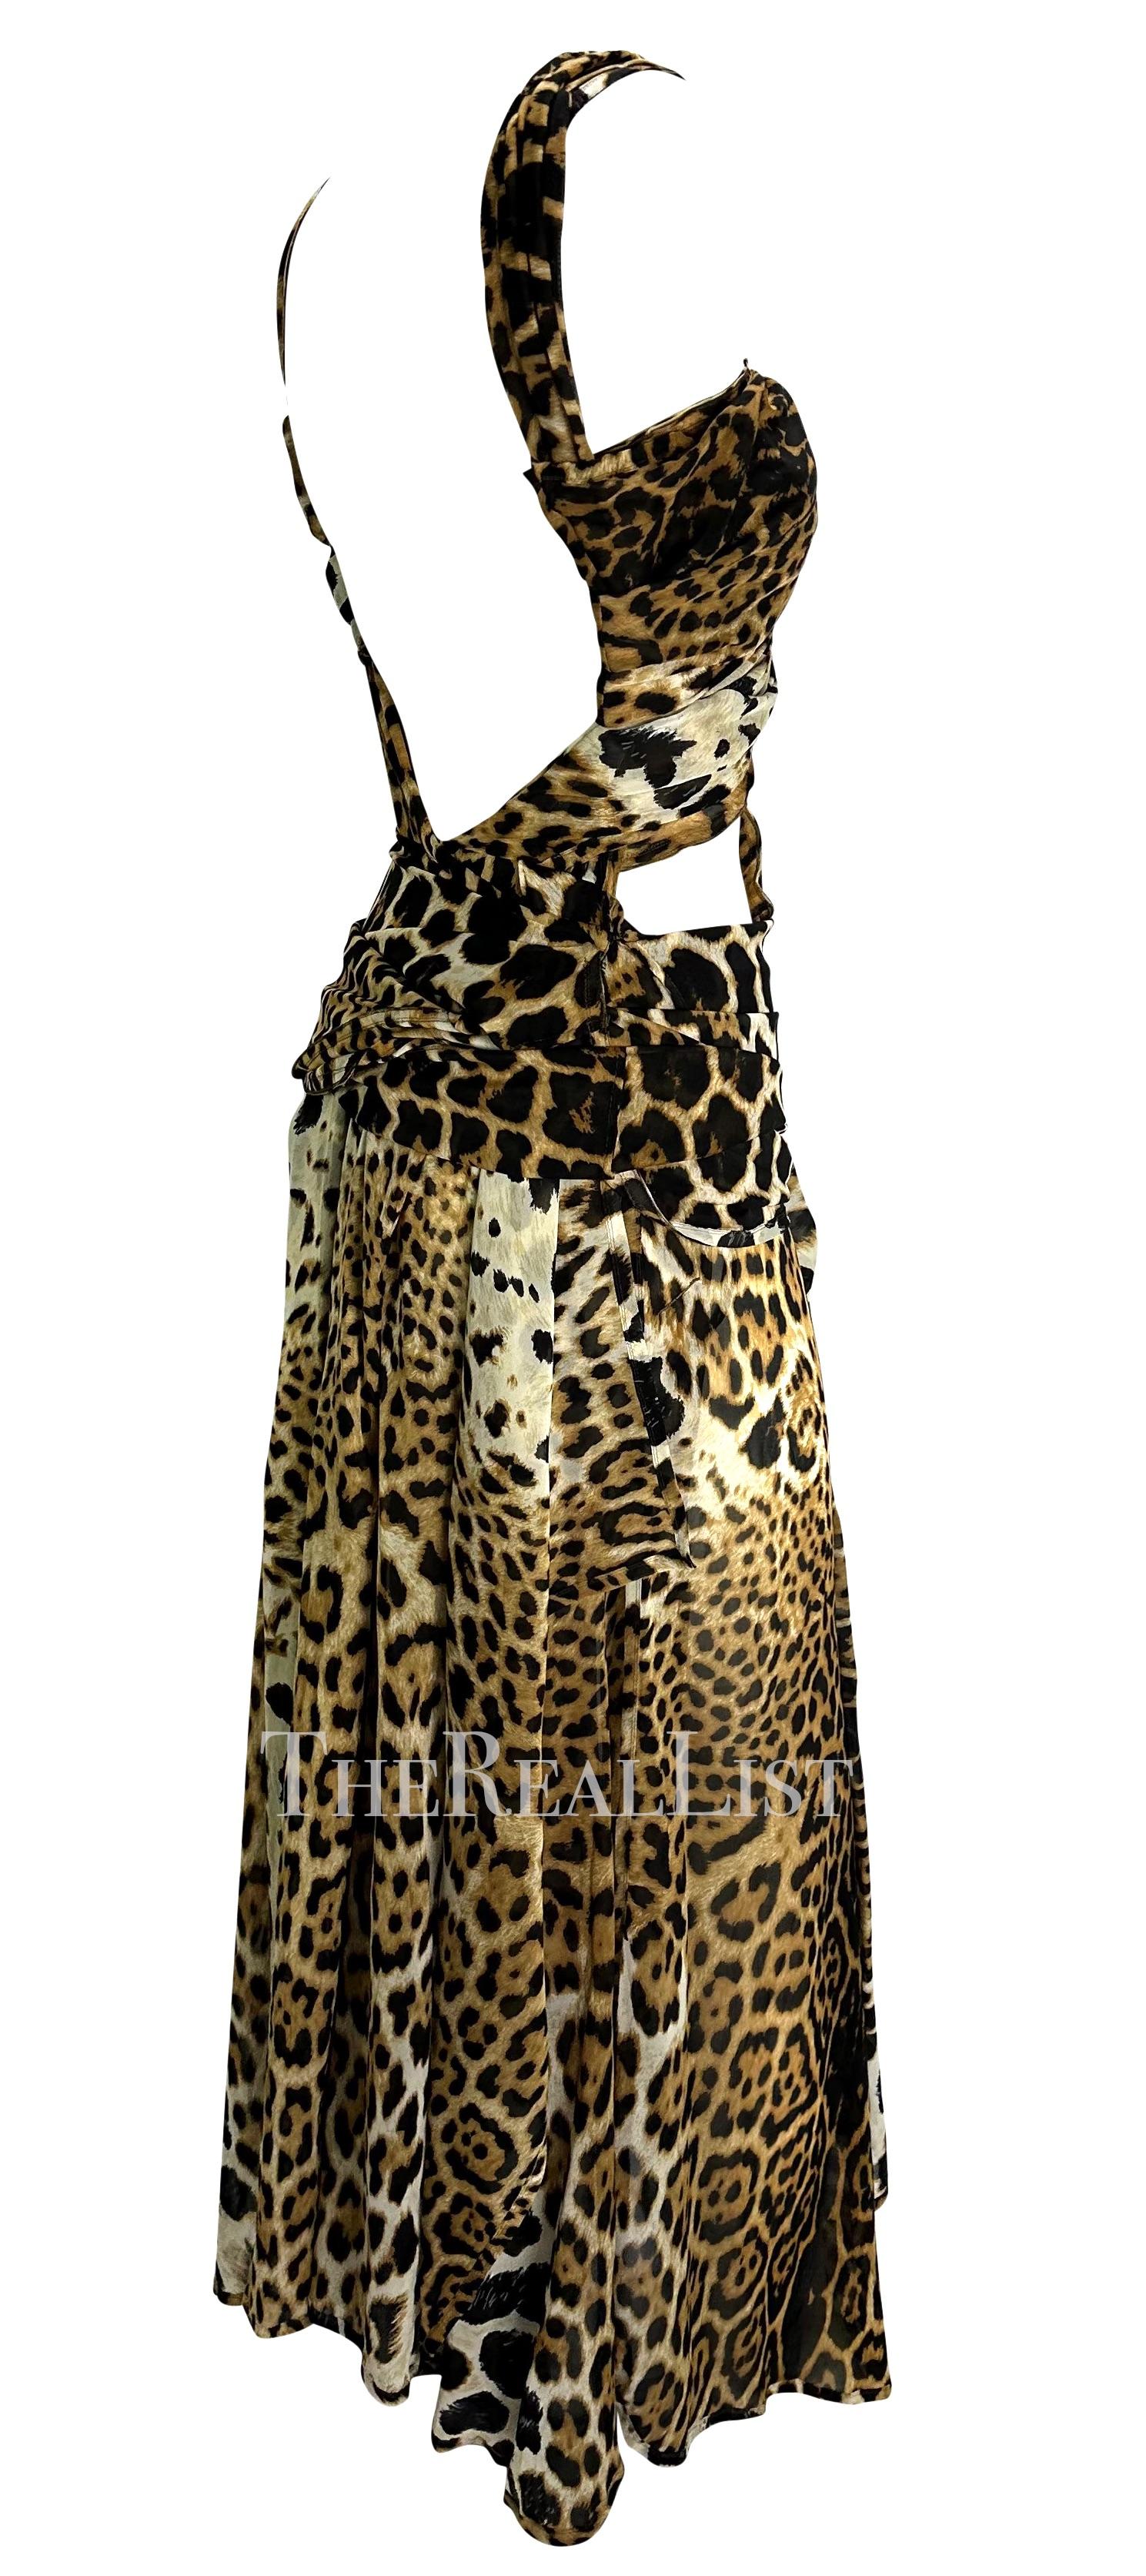 S/S 2002 Yves Saint Laurent by Tom Ford Runway Cheetah Print Chiffon Wrap Gown For Sale 9